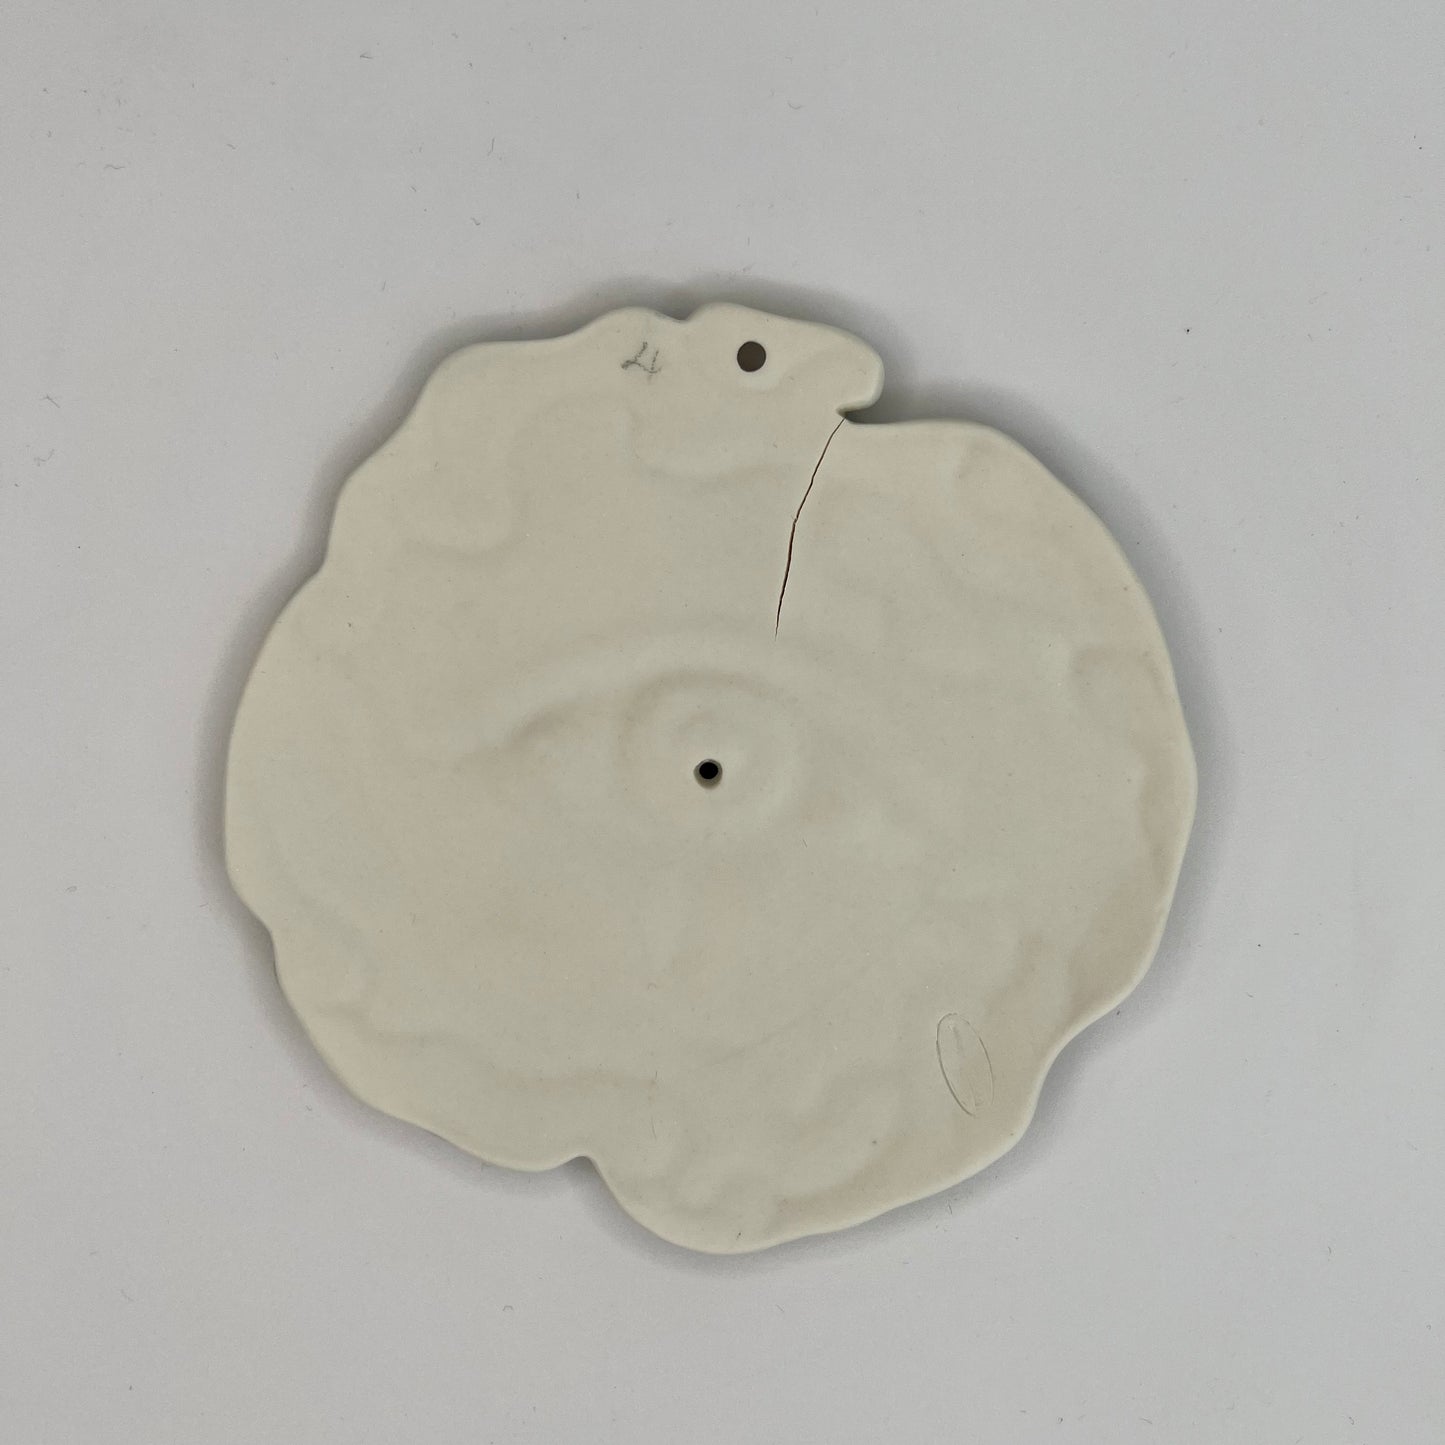 Seconds & Samples - Flaming Eye Incense Holder / Wall Ornament 2 -  Hand crafted Porcelain Home Ornament. Circular ornament with Eye and Flame Border.